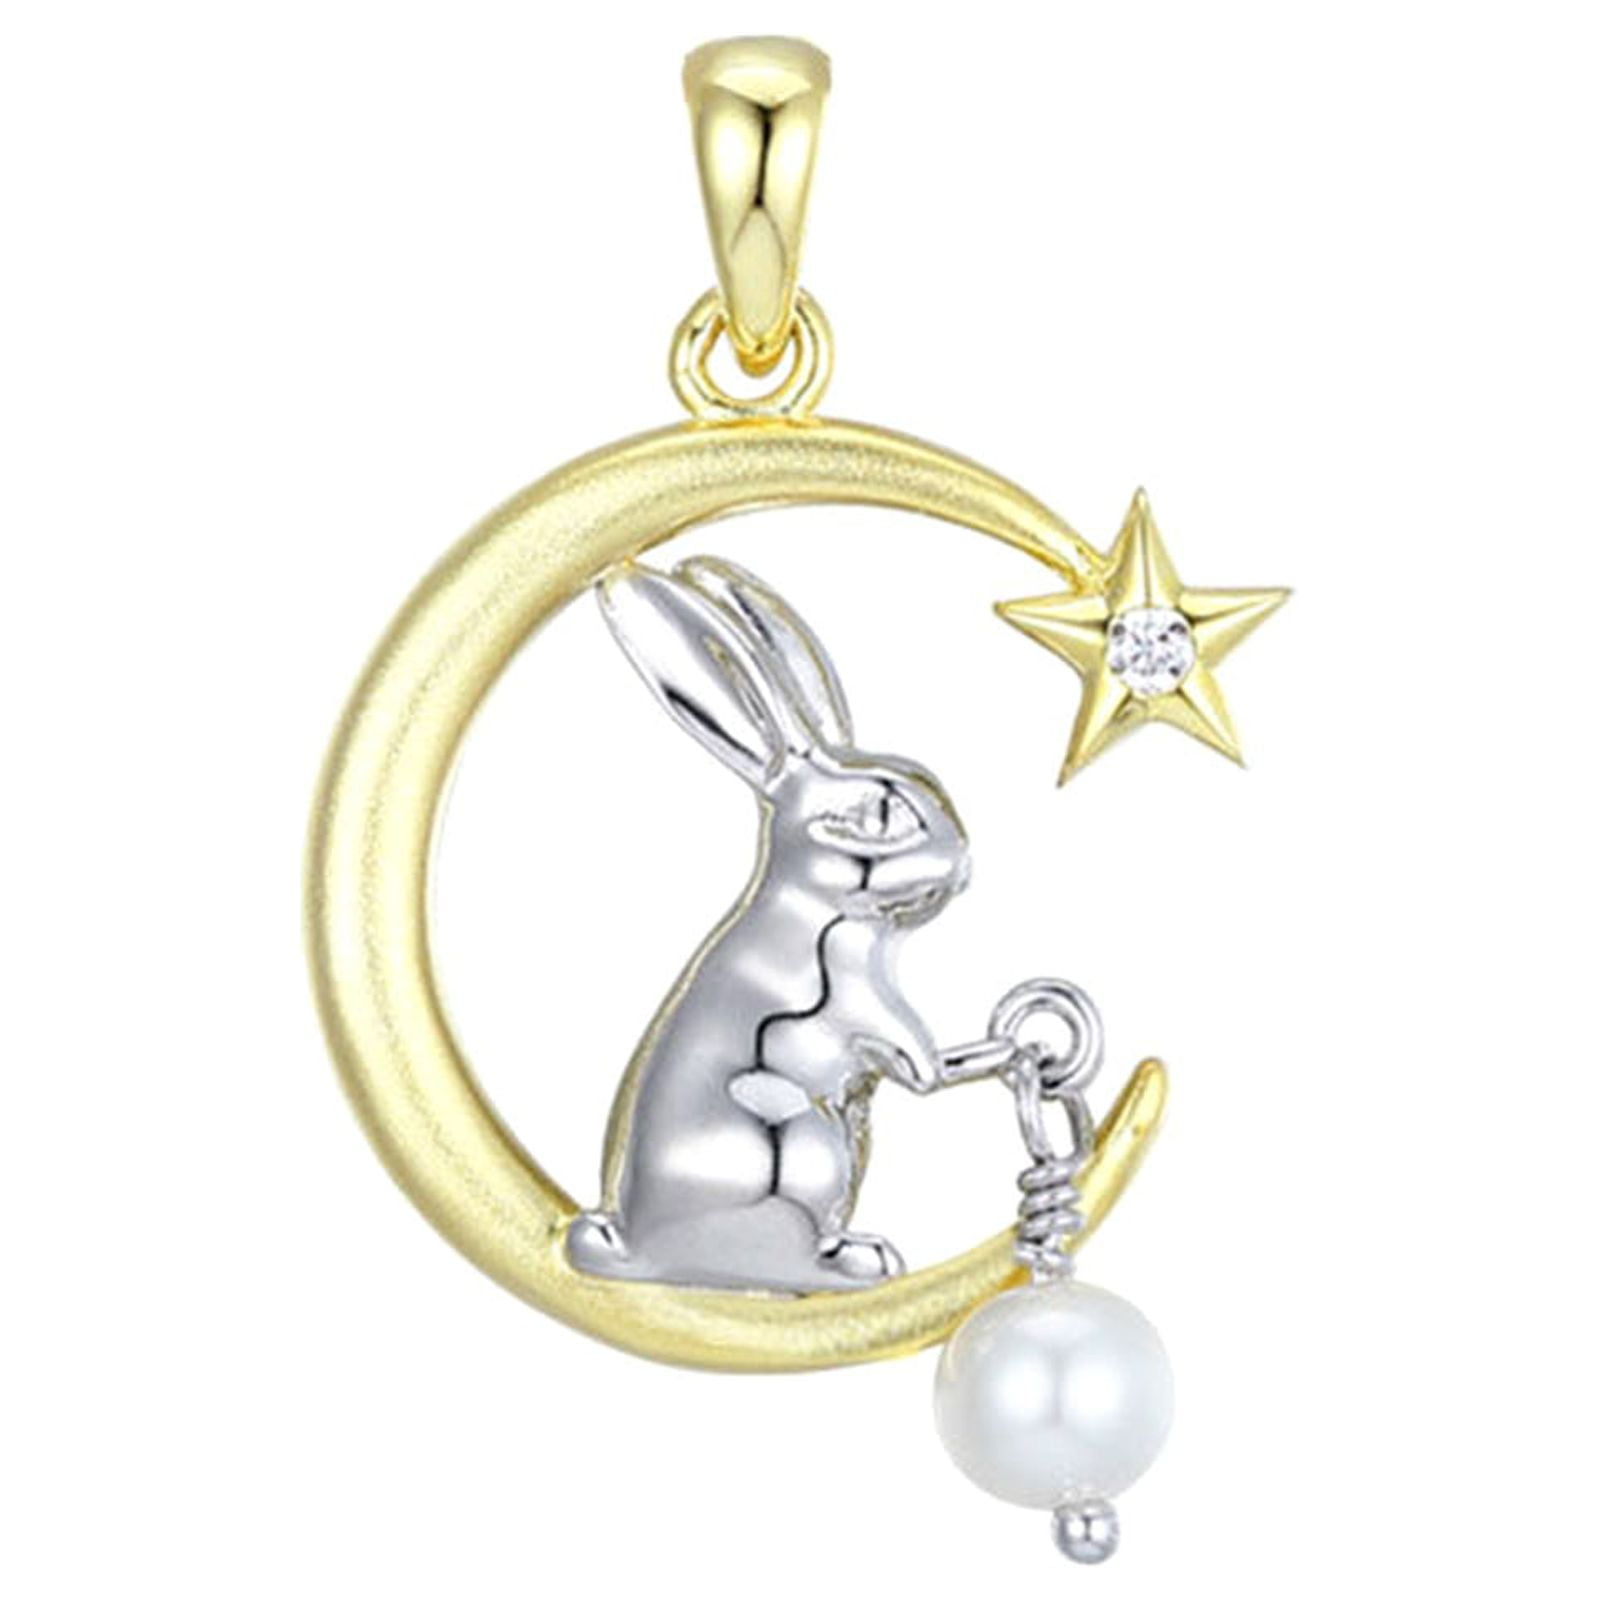  KESYOO 4pcs Necklace Bunny Gifts Bunny Decor Simple Necklace  Play Jewelry for Little Girls Age 3 Moon Ornament Girls Jewelry Ages 4-6  Small Necklace Rabbit on The Moon Necklace Blue Charm 